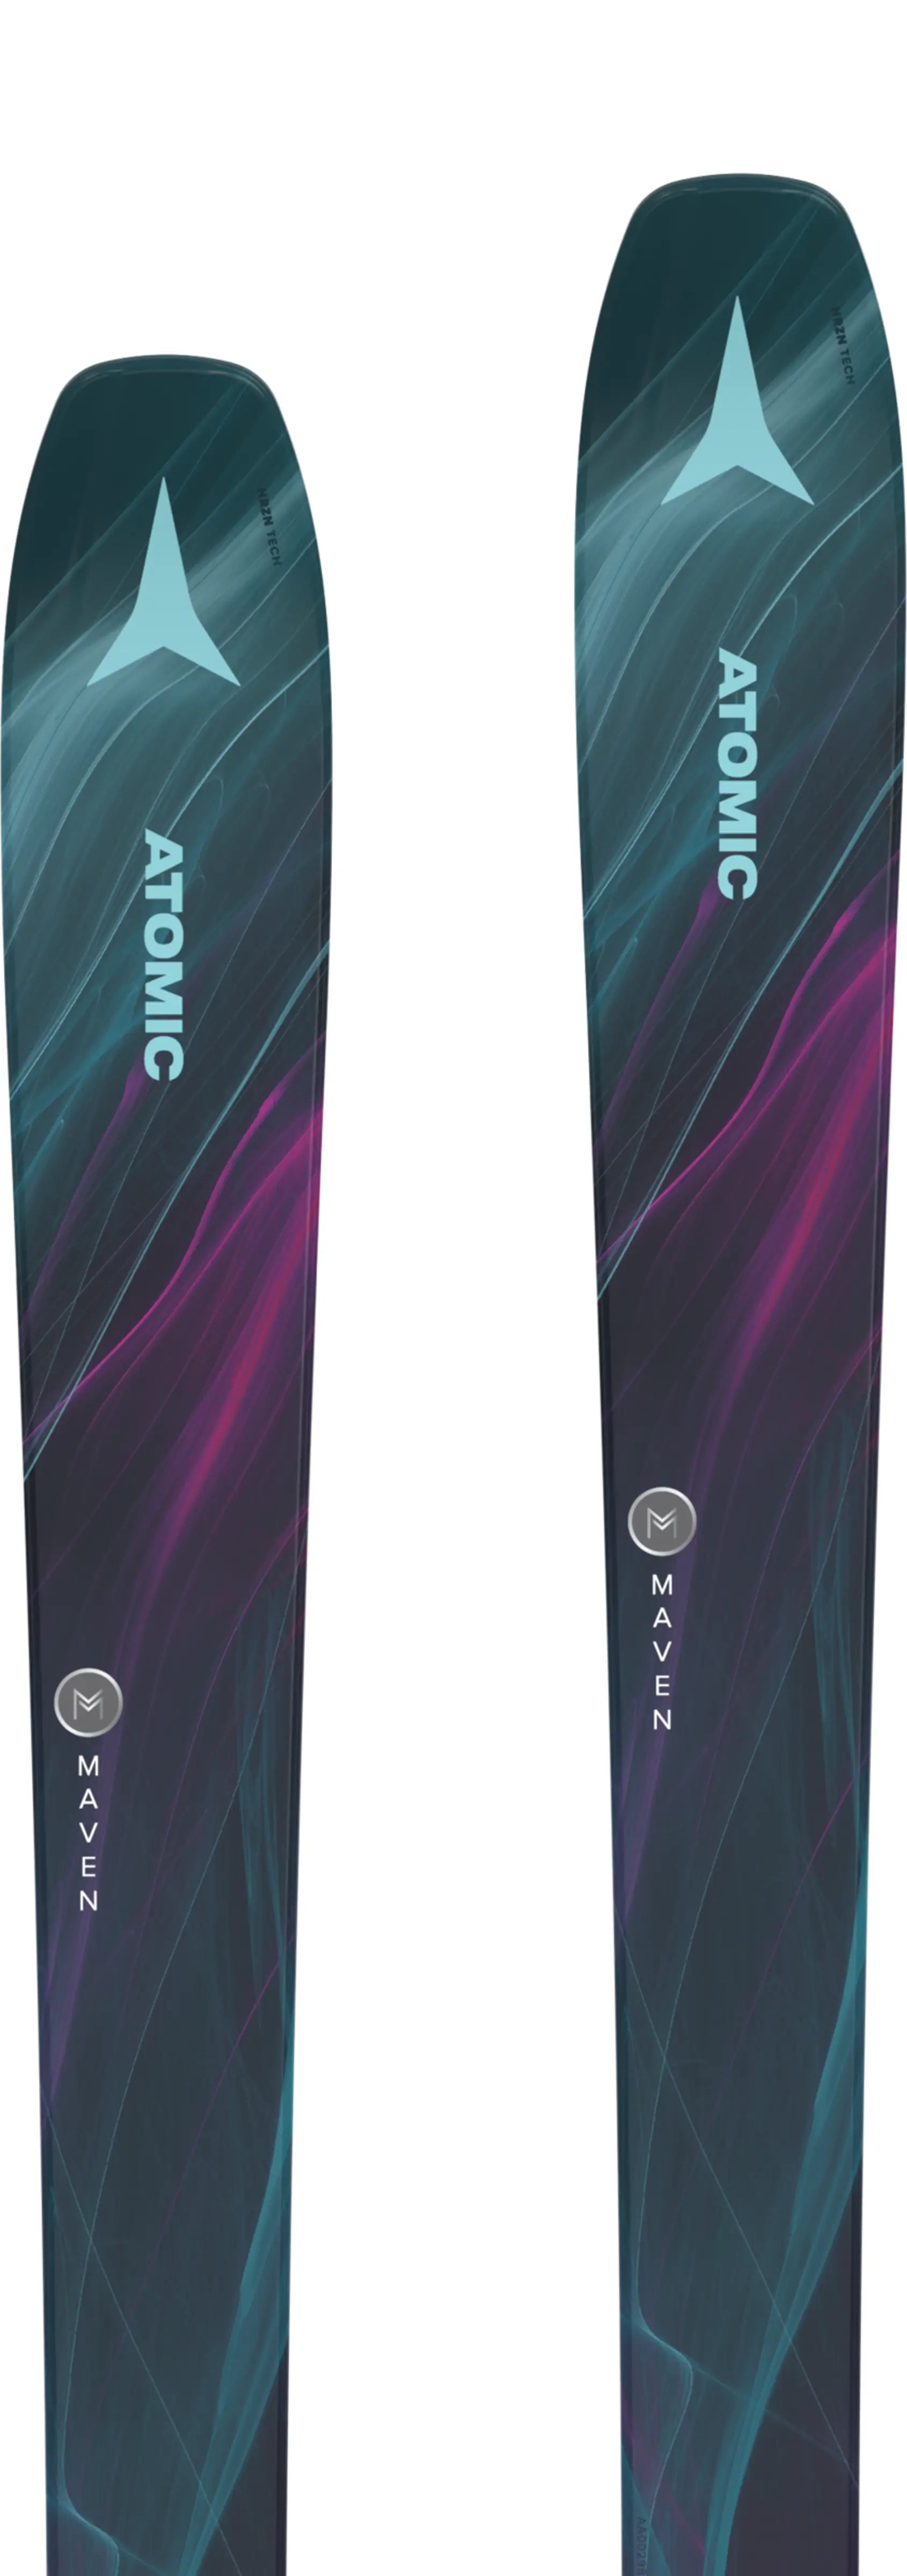 Approved by Atomic’s #sheskis ambassador team, the all-mountain women’s Atomic Maven 86 delivers exact and relaxed skiing in any snow condition.